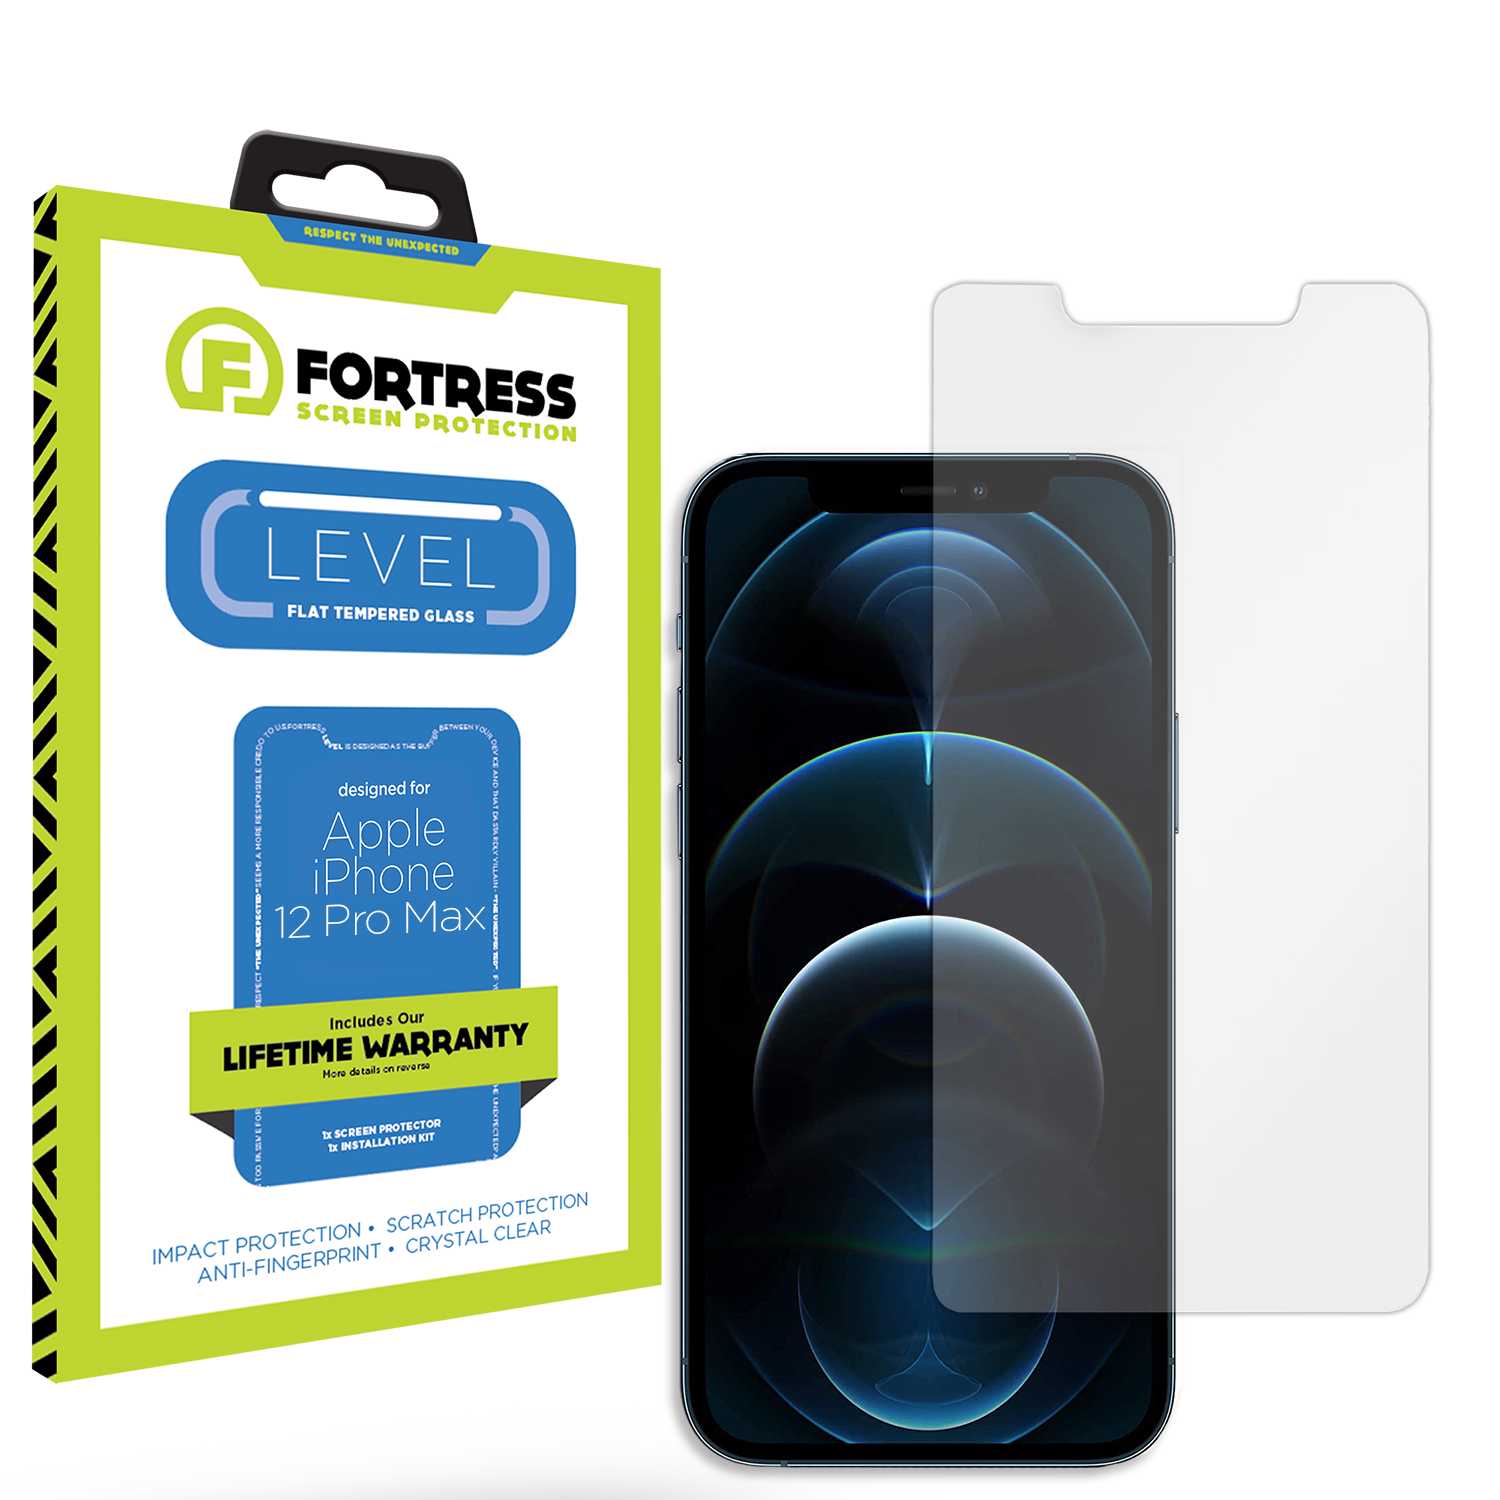 Fortress iPhone 12 Pro Max Screen Protector $0Coverage Scooch Screen Protector